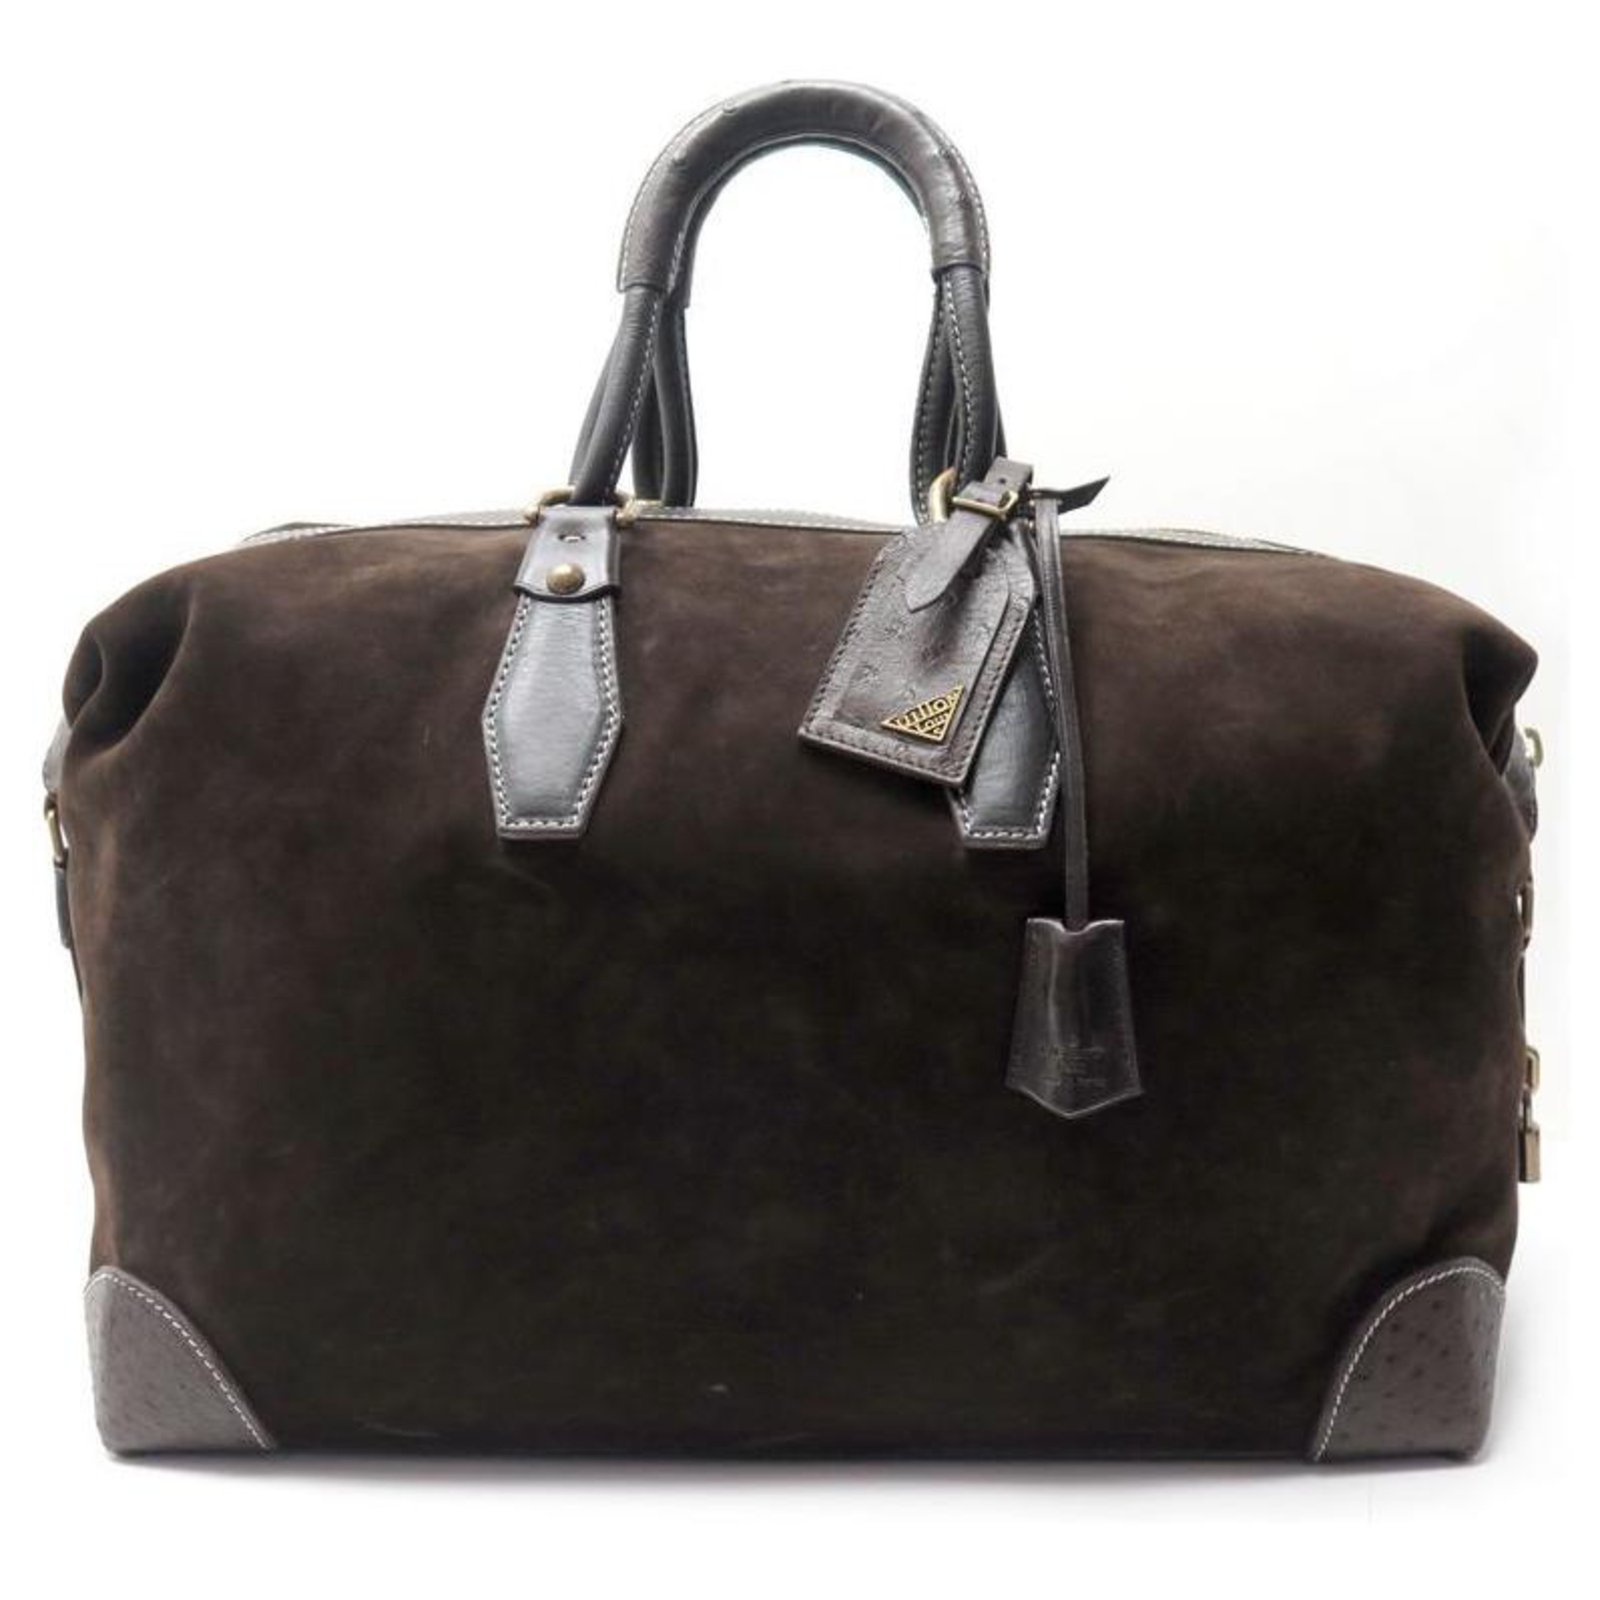 LOUIS VUITTON HANDED TRAVEL BAG IN BROWN SUEDE & OSTRICH LEATHER